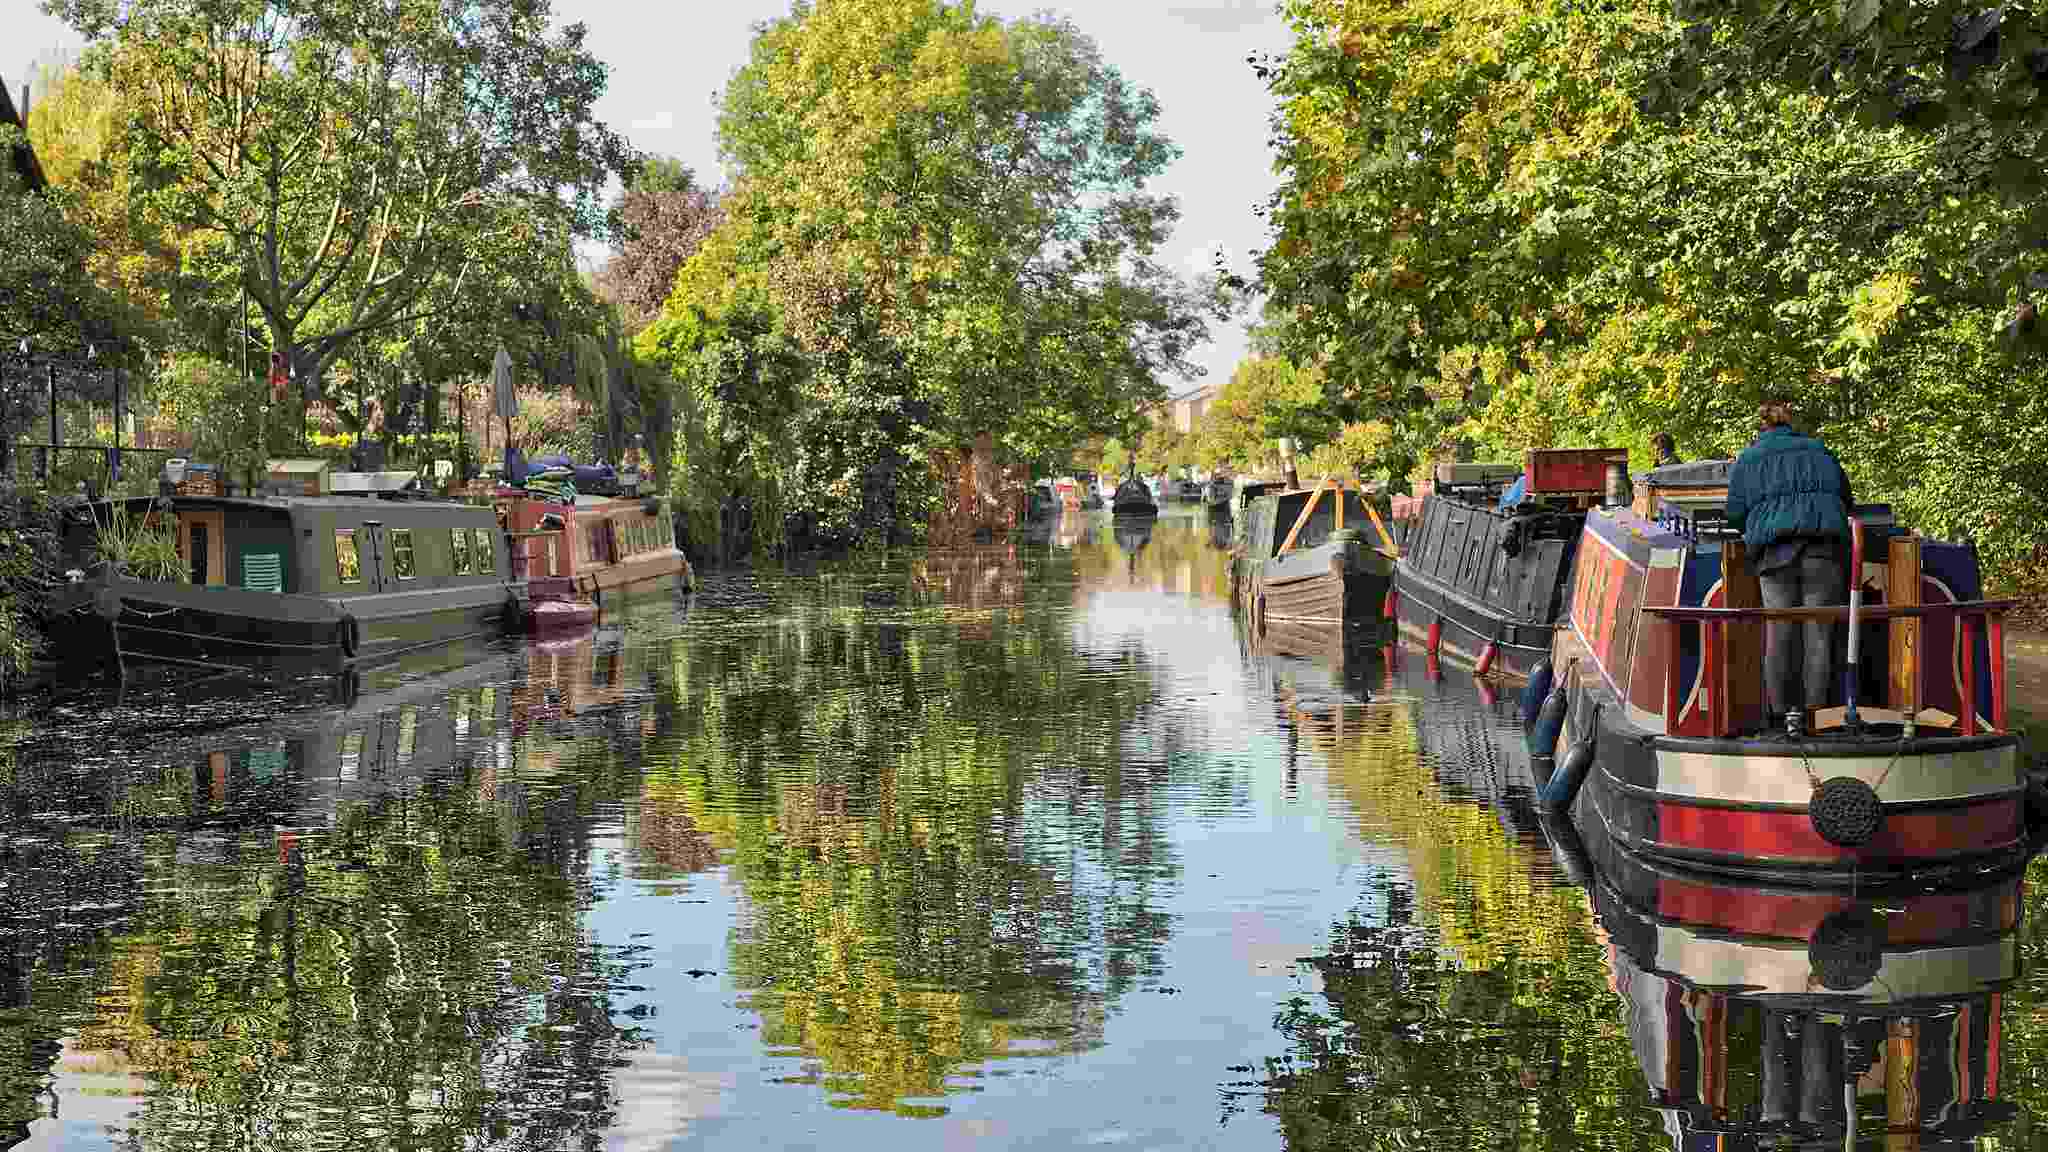 Top Tips from our Narrowboat Expert